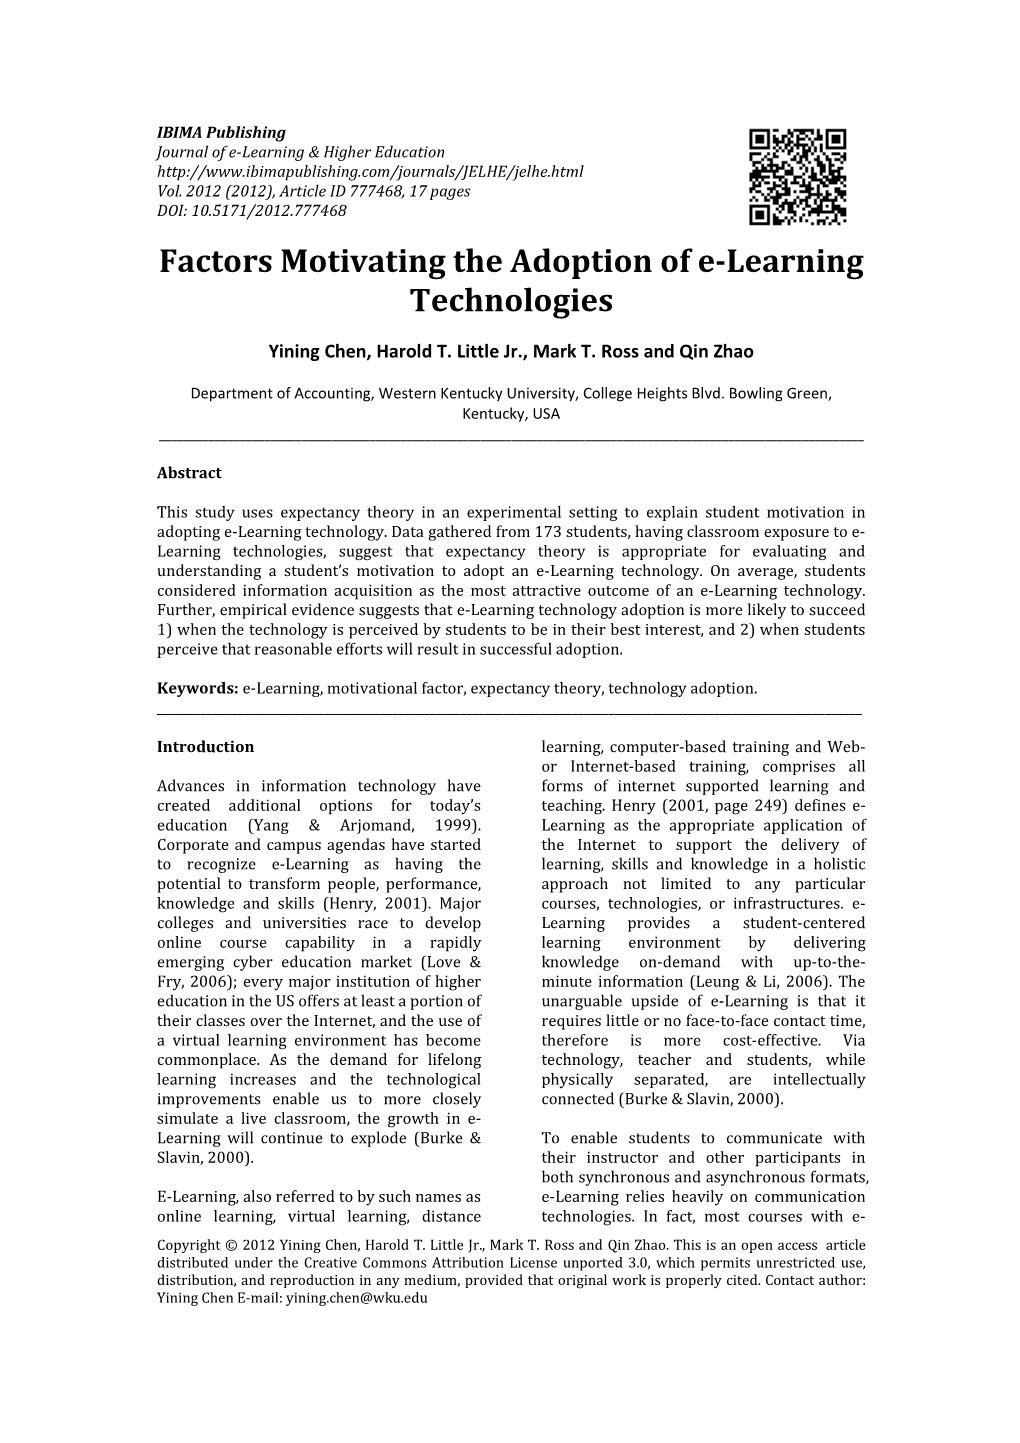 Factors Motivating the Adoption of E-Learning Technologies